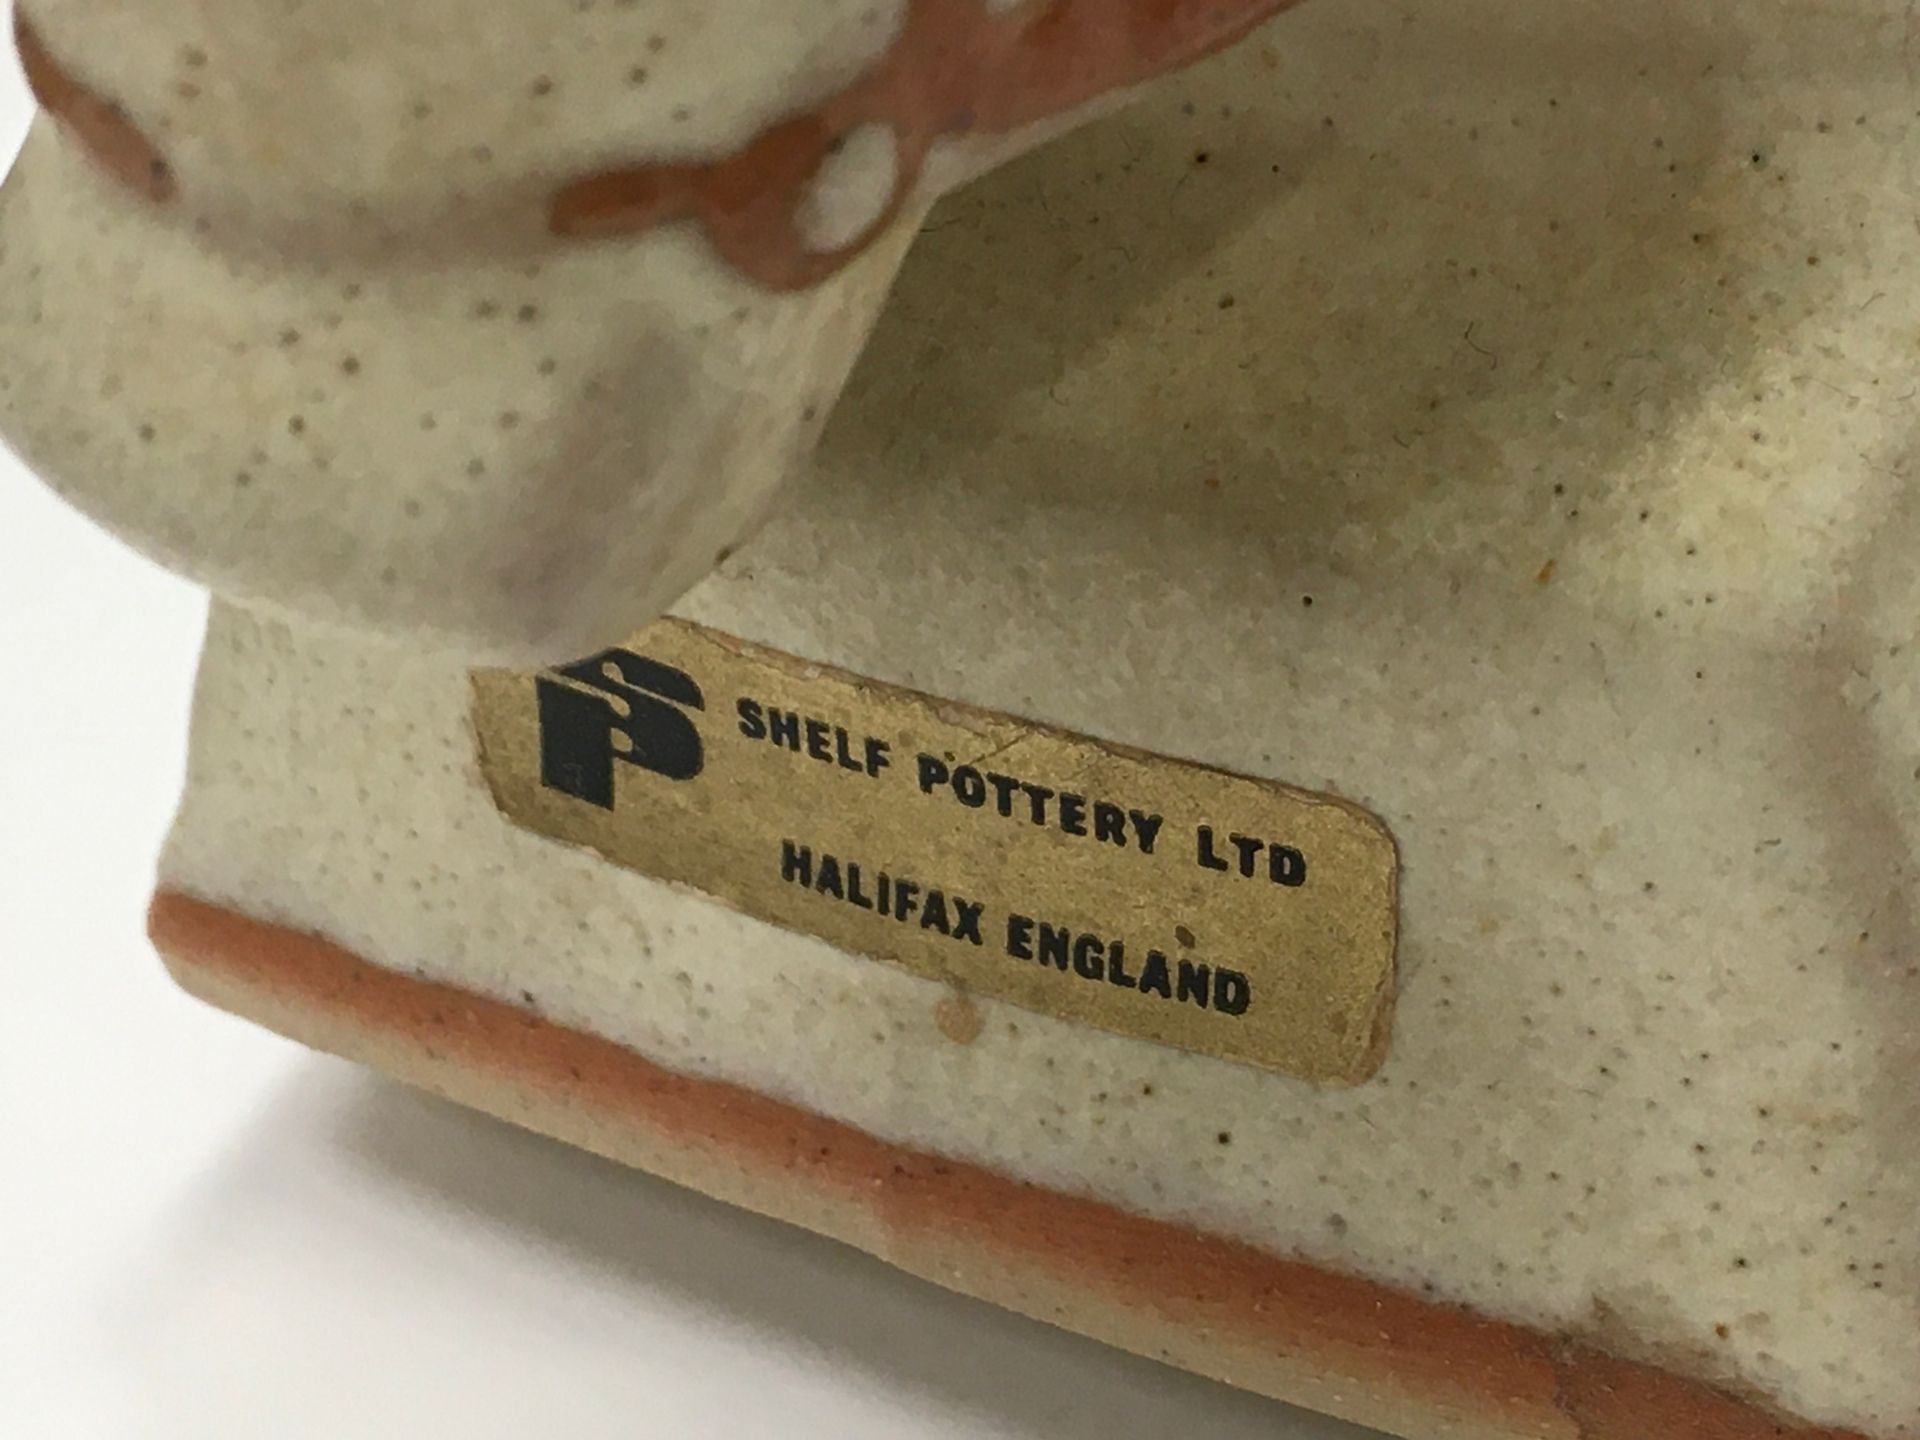 Collection of Shelf Pottery Halifax stoneware money boxes (6). - Image 4 of 4